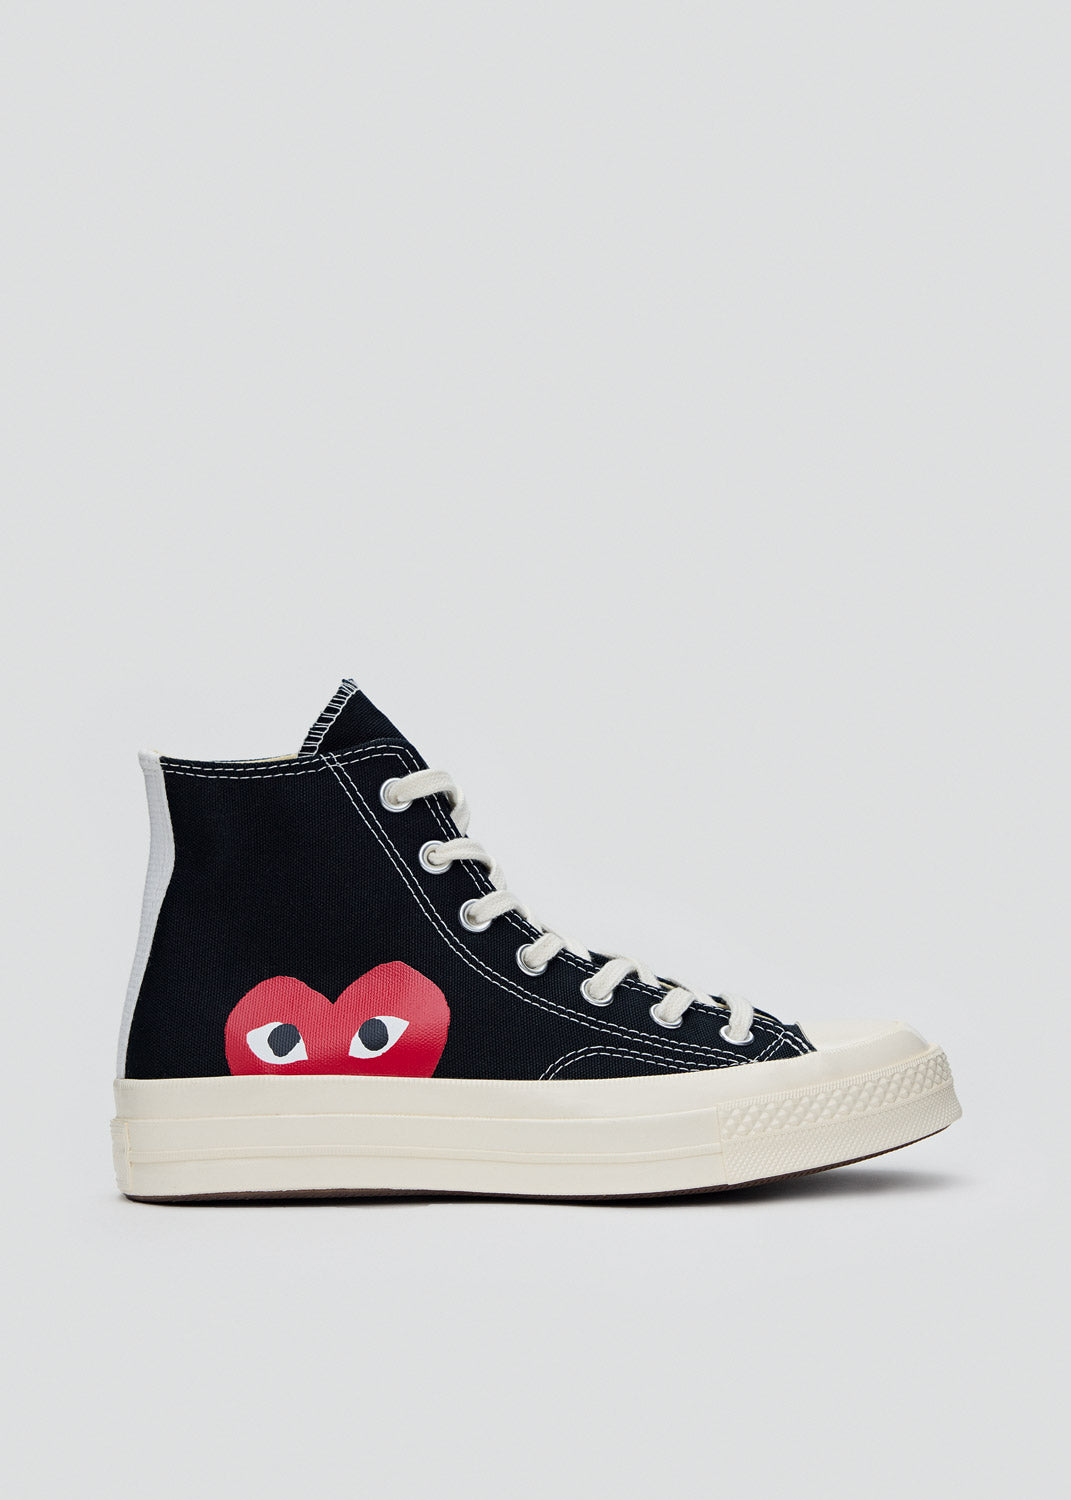 Comme des Garçons PLAY - Black CDG Chuck 70 High Sneakers 1032 SPACE – 1032 Space